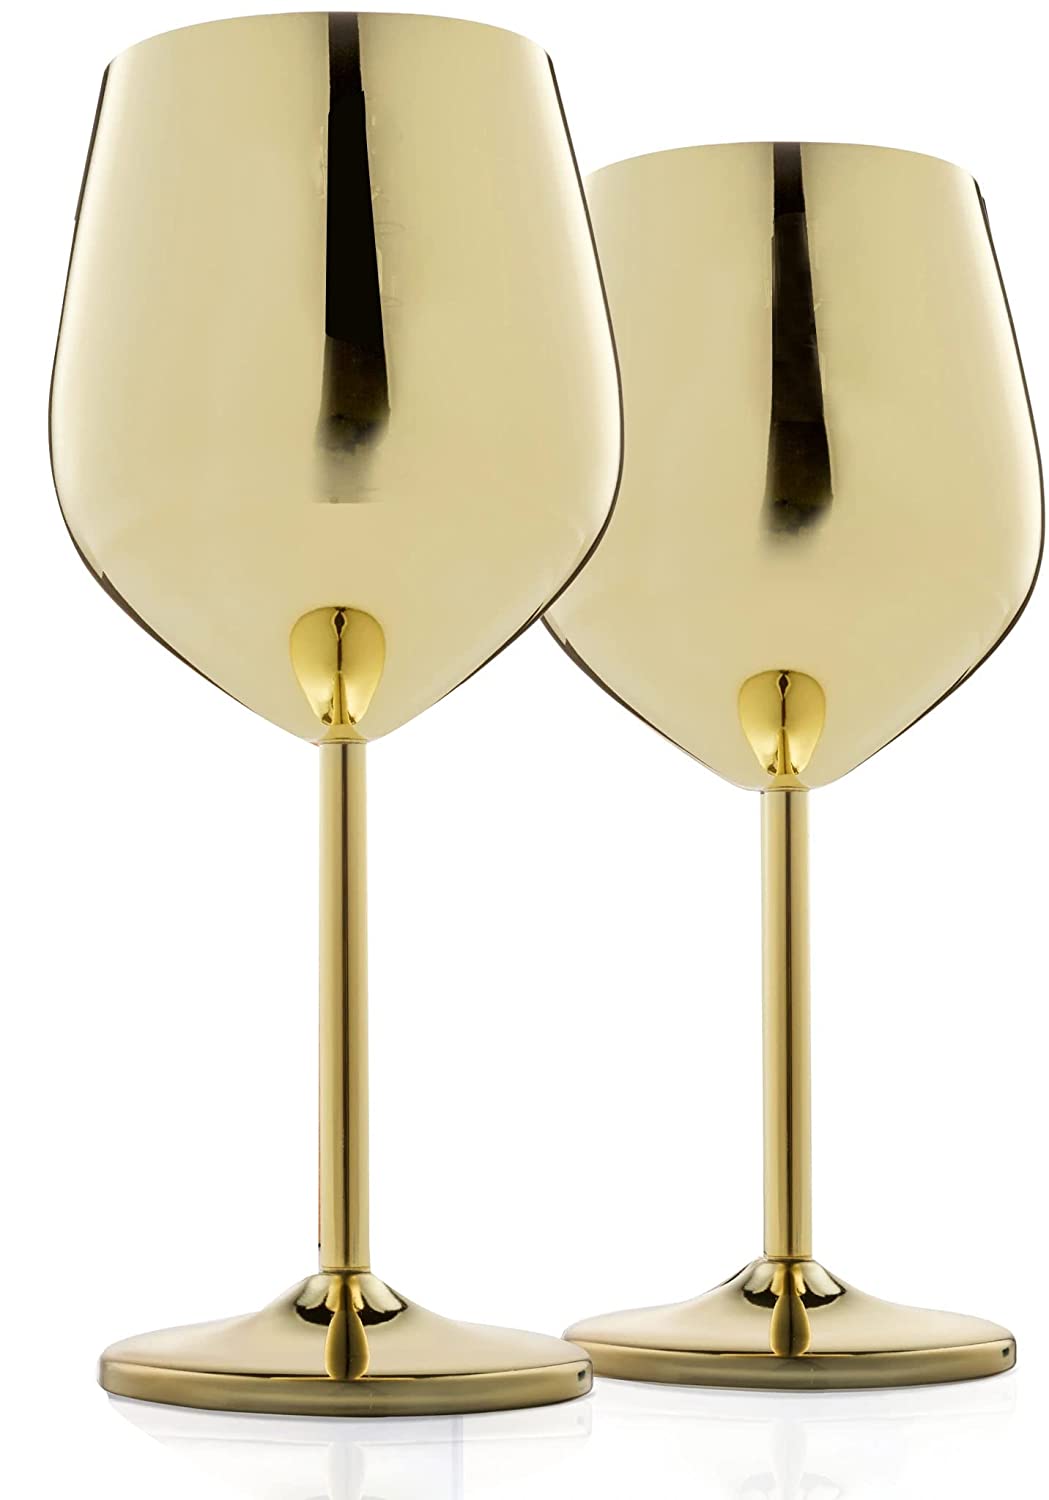 NJ Gold Wine Glasses, Shatter Proof Gold Coated Steel Unbreakable Wine Glass Goblets, Gift for Men and Women, Party Supplies - 350 ml: Set of 2 Pcs